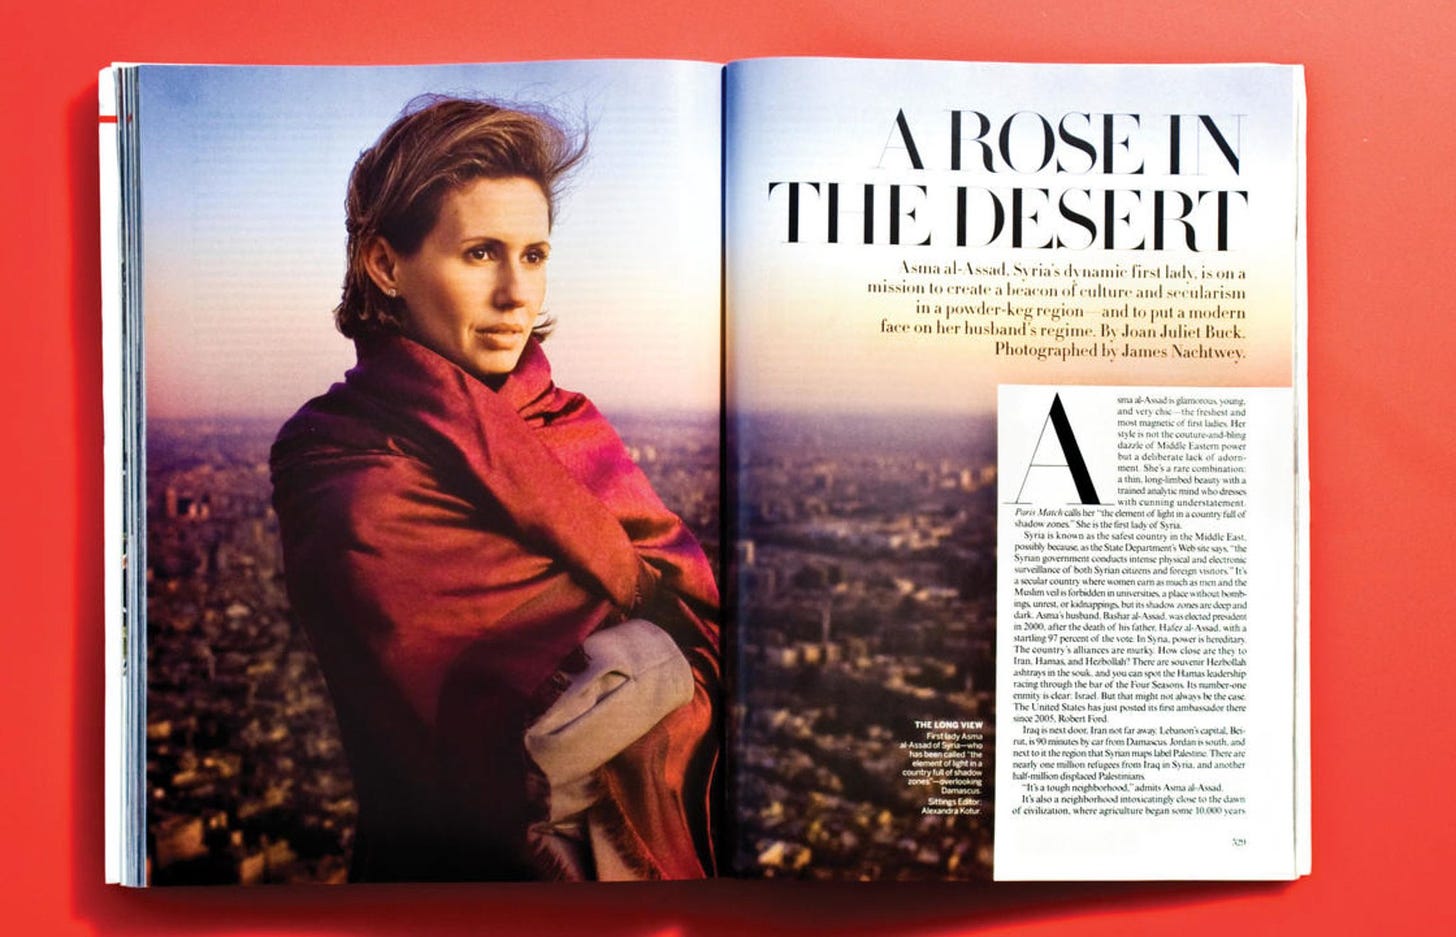 Hillel Neuer on Twitter: ".@voguemagazine Your “Rose in the Desert“ Asma  Al-Assad is being investigated by the UK police for inciting terrorism.  https://t.co/nQZ0EZKa9Z" / Twitter